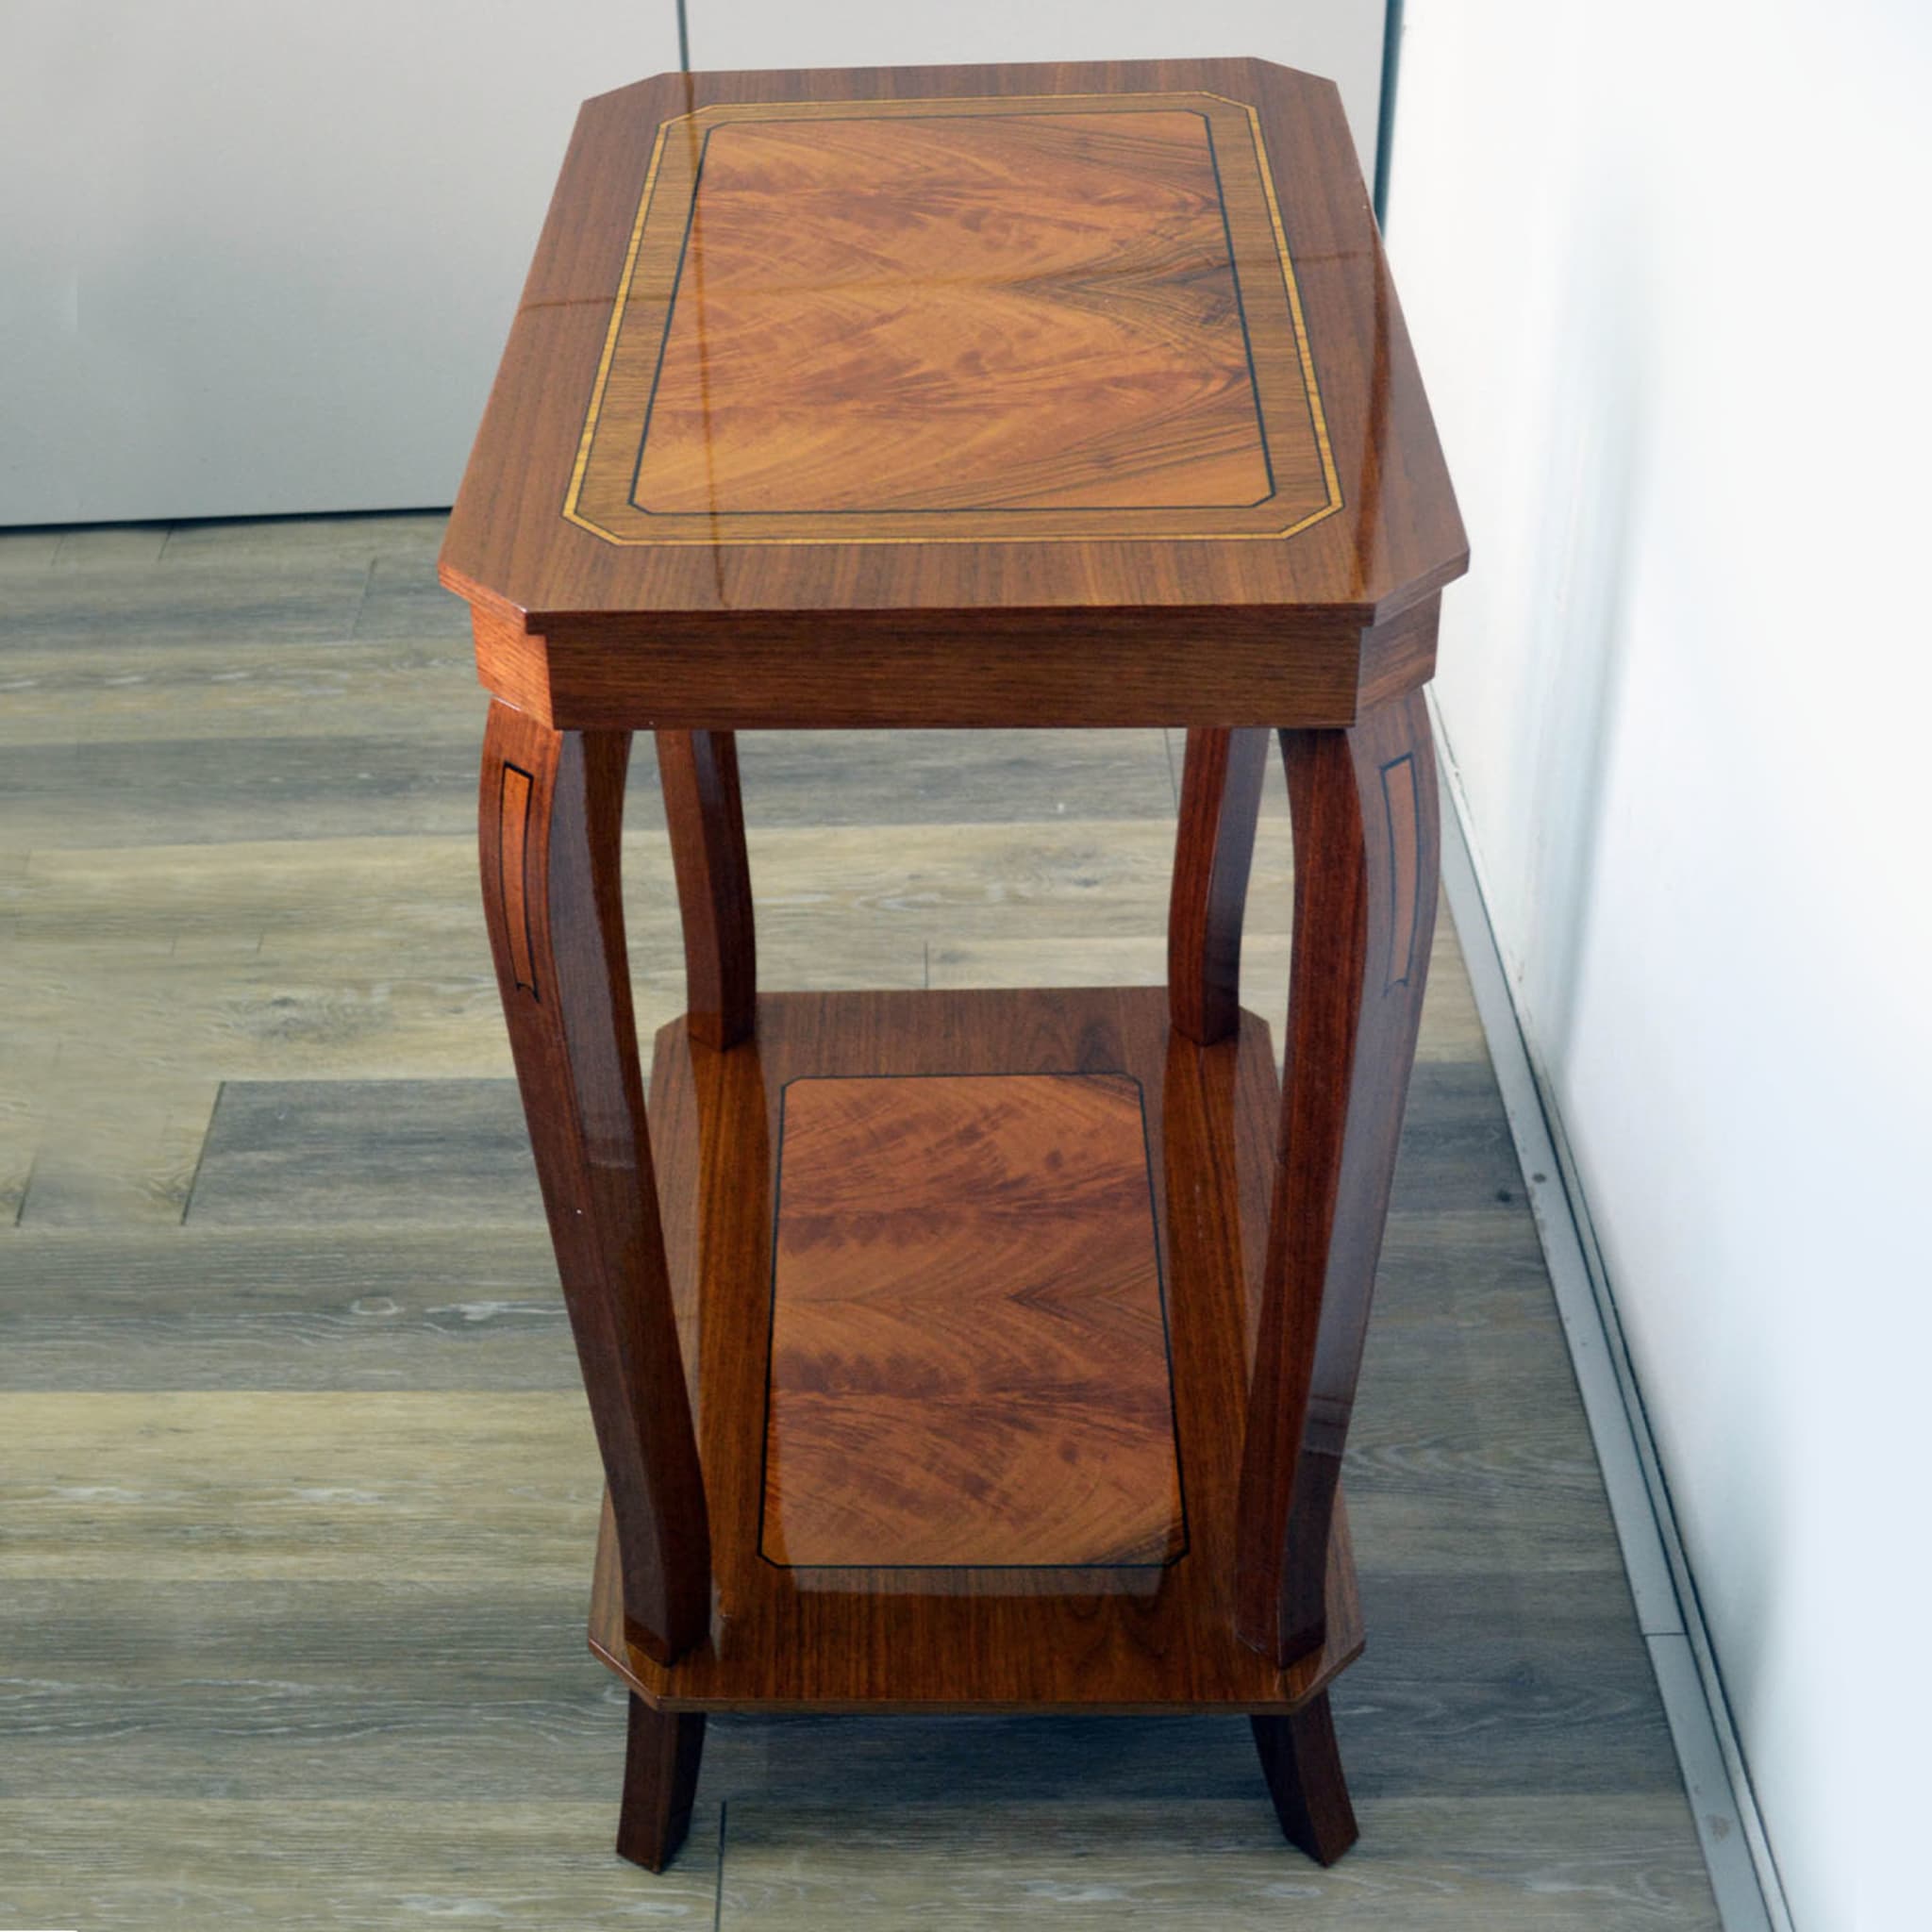 Musical Walnut Side Table with Storage Unit - Alternative view 4